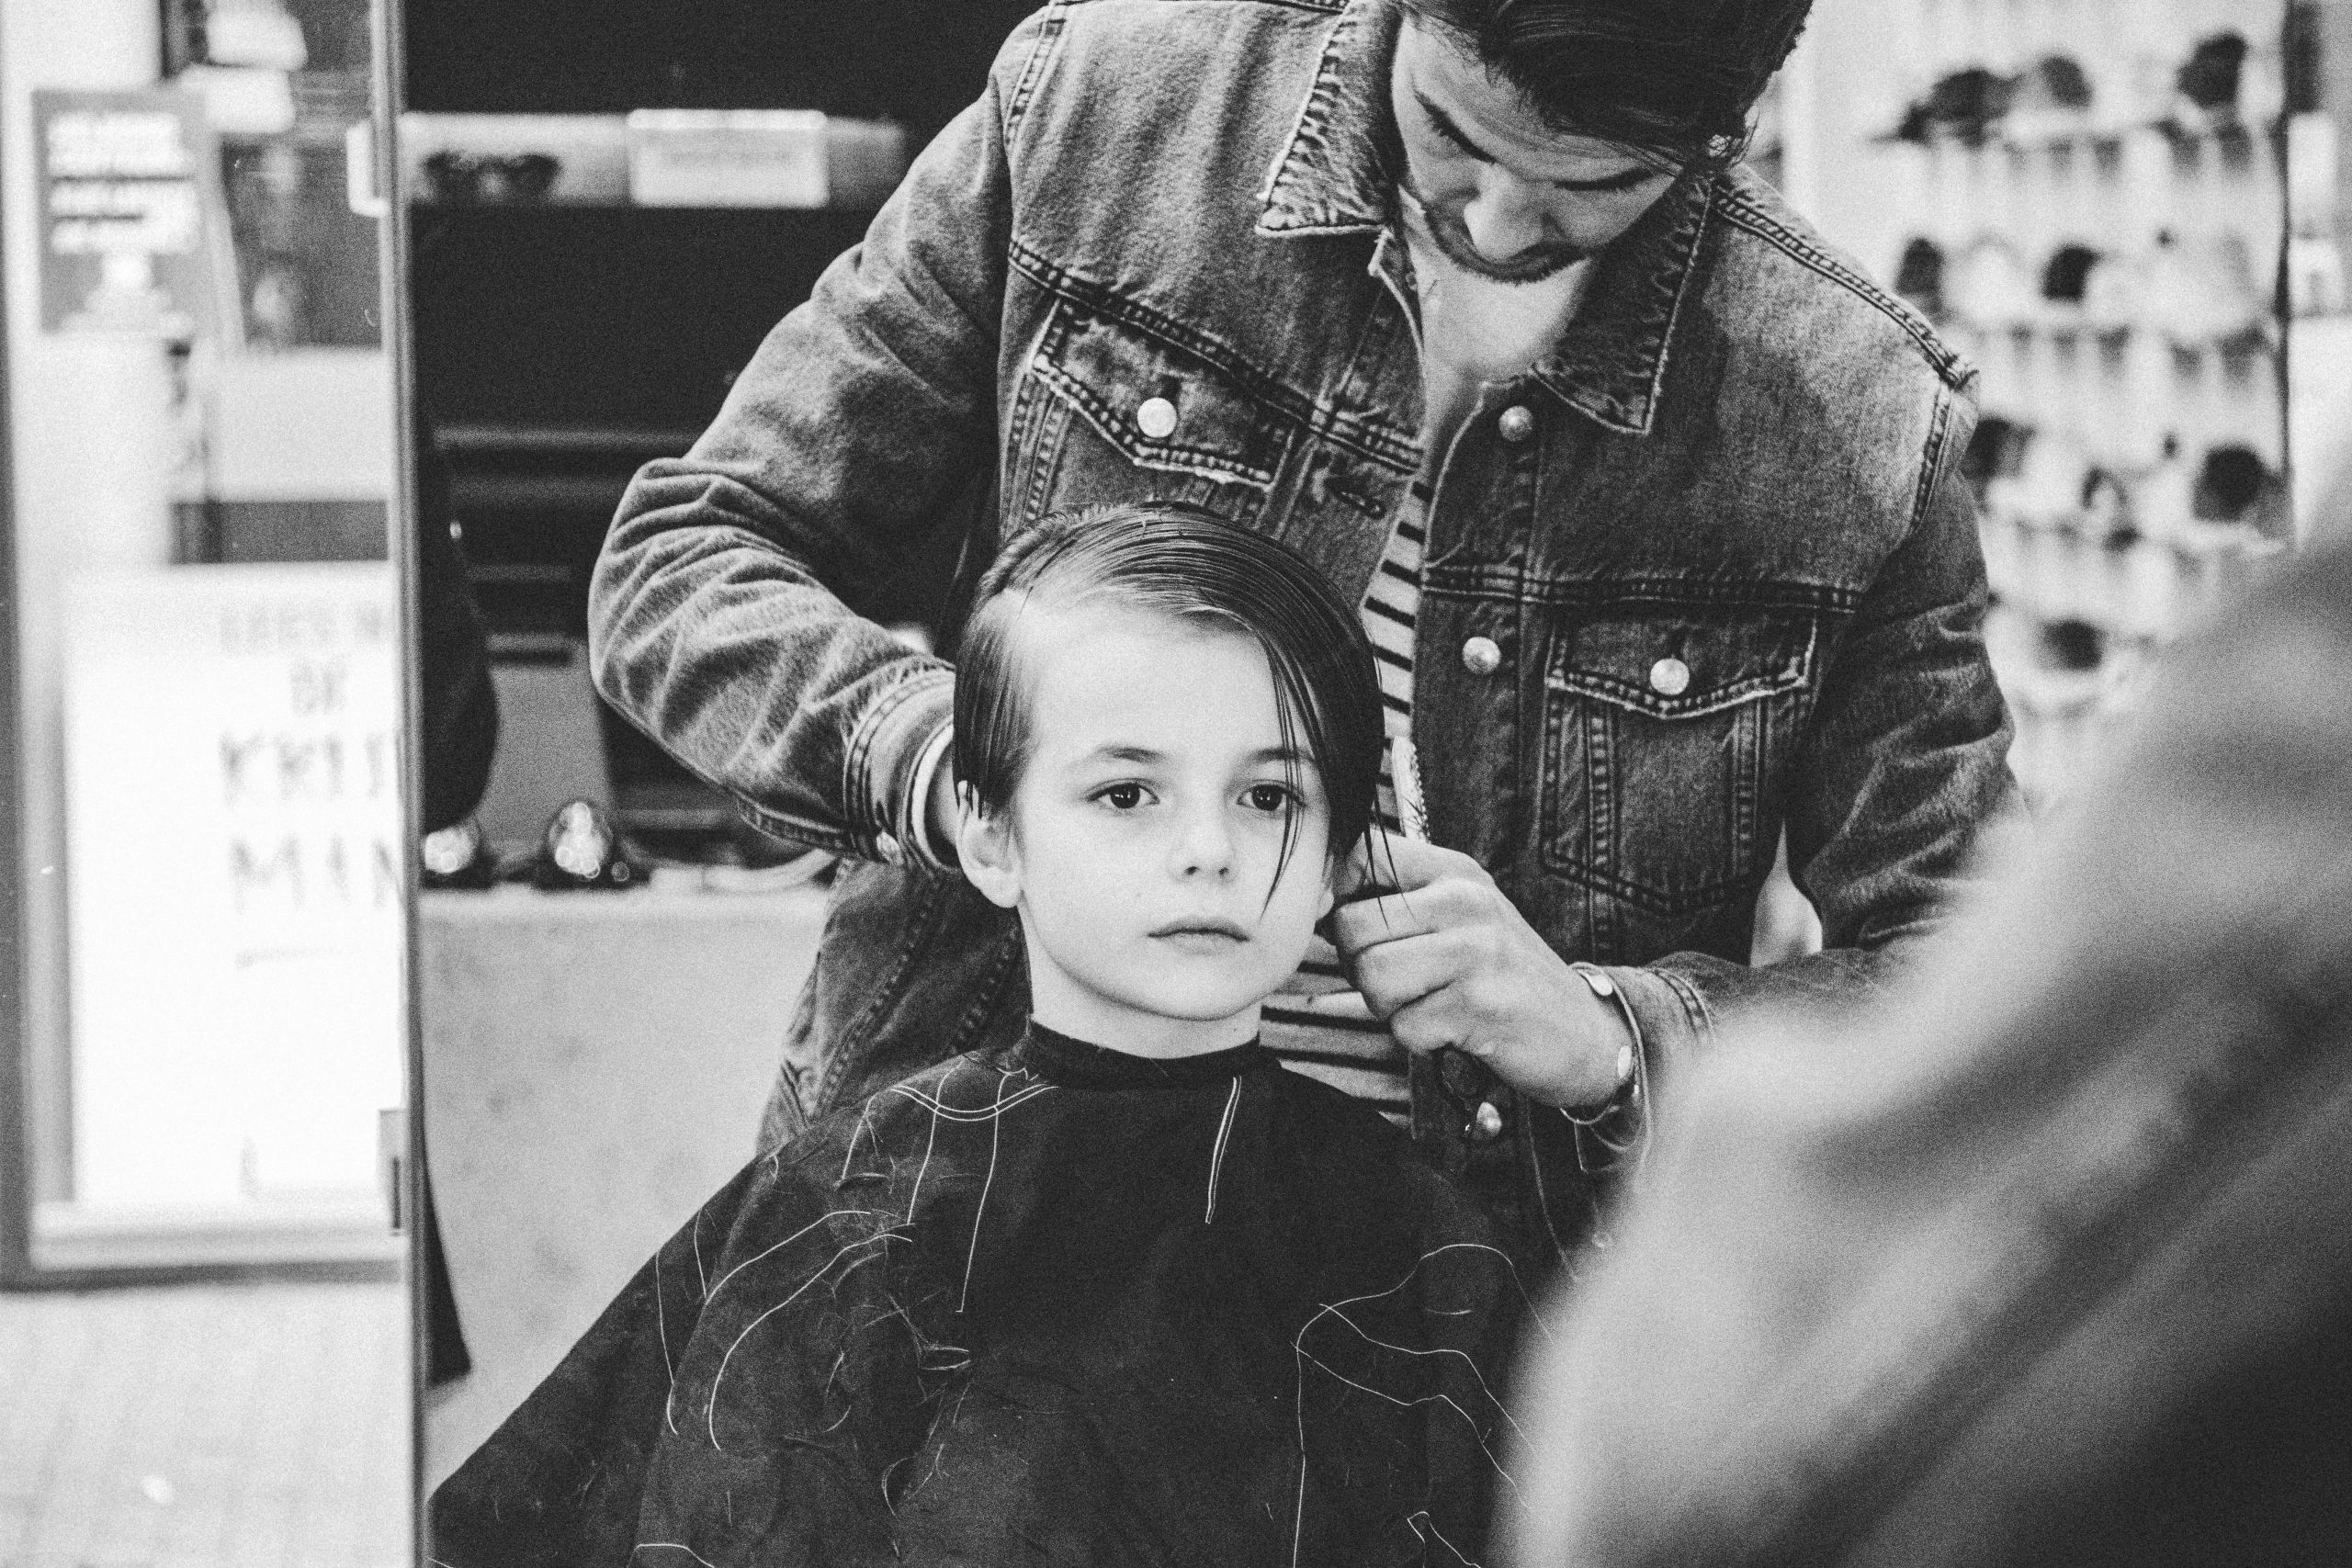 Kids Haircuts Portland Awesome Best Places To Get Kids Haircuts In Portland Or Of Kids Haircuts Portland Scaled 